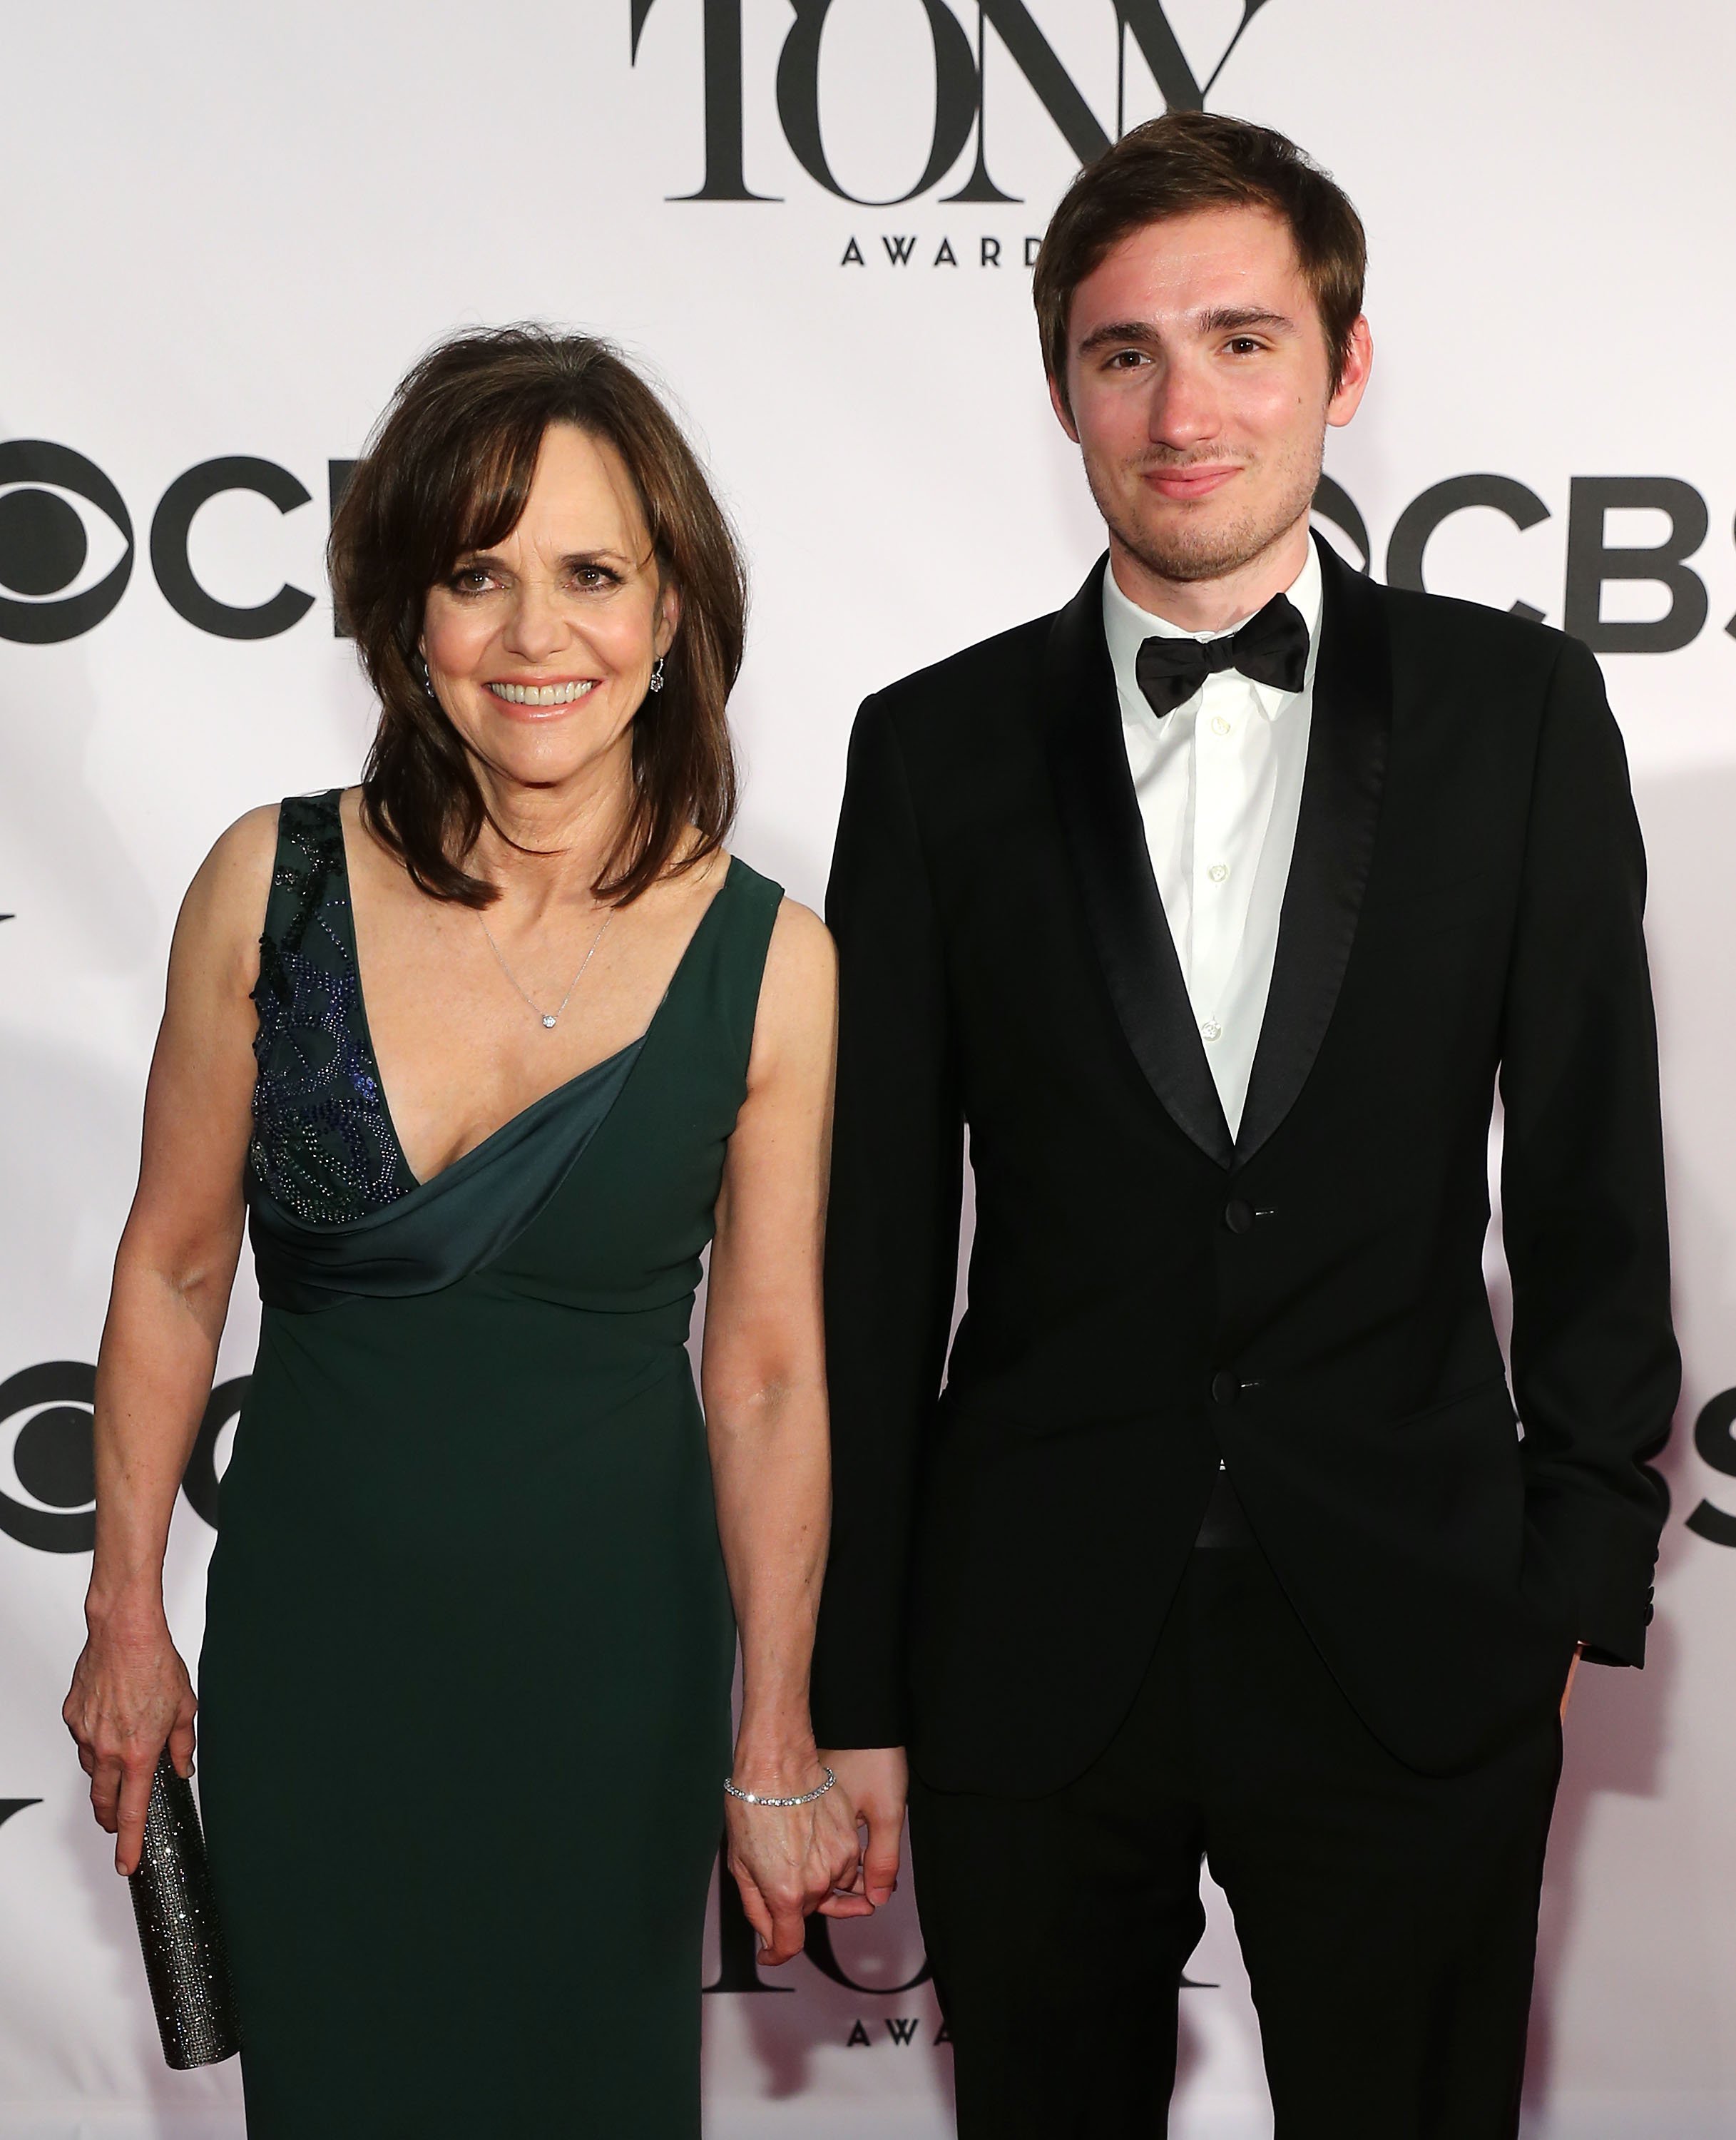 Sally Field and son Samuel Greisman attend The 67th Annual Tony Awards at Radio City Music Hall on June 9, 2013 in New York City. | Source: Getty Images